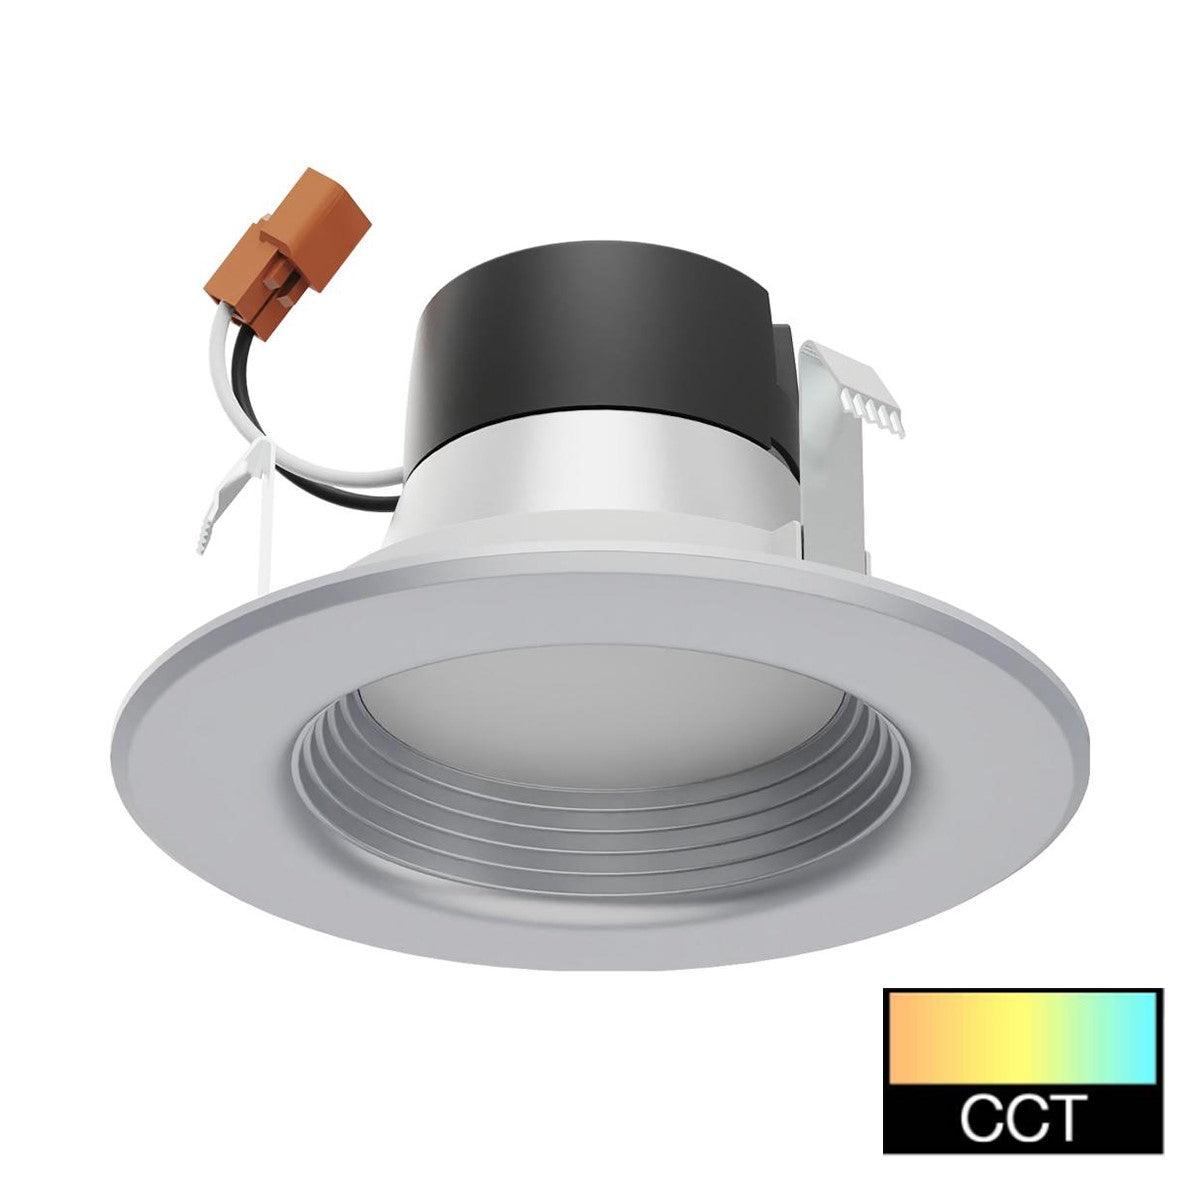 4 Inch Recessed LED Can Light, Round, 7 Watt, 600 Lumens, Selectable CCT, 2700K to 5000K, Brushed Nickel Finish